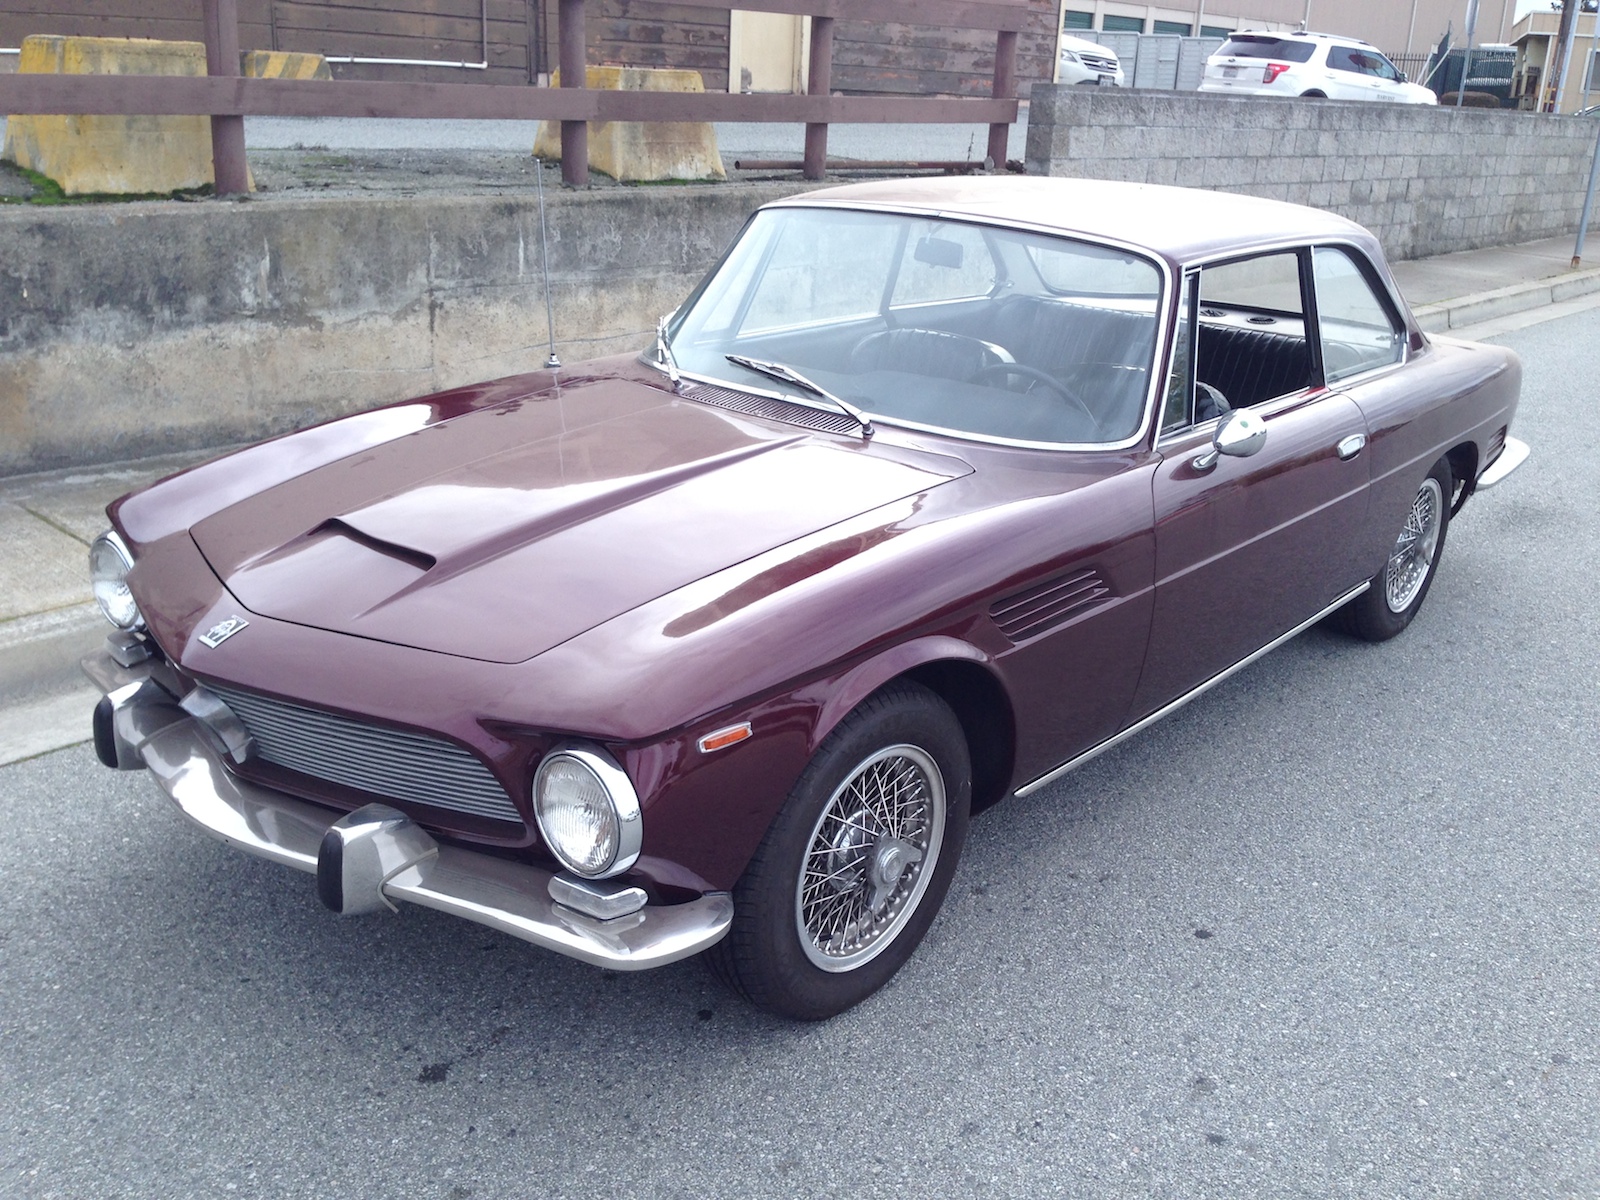 An Iso Rivolta For Sale - Now Sold